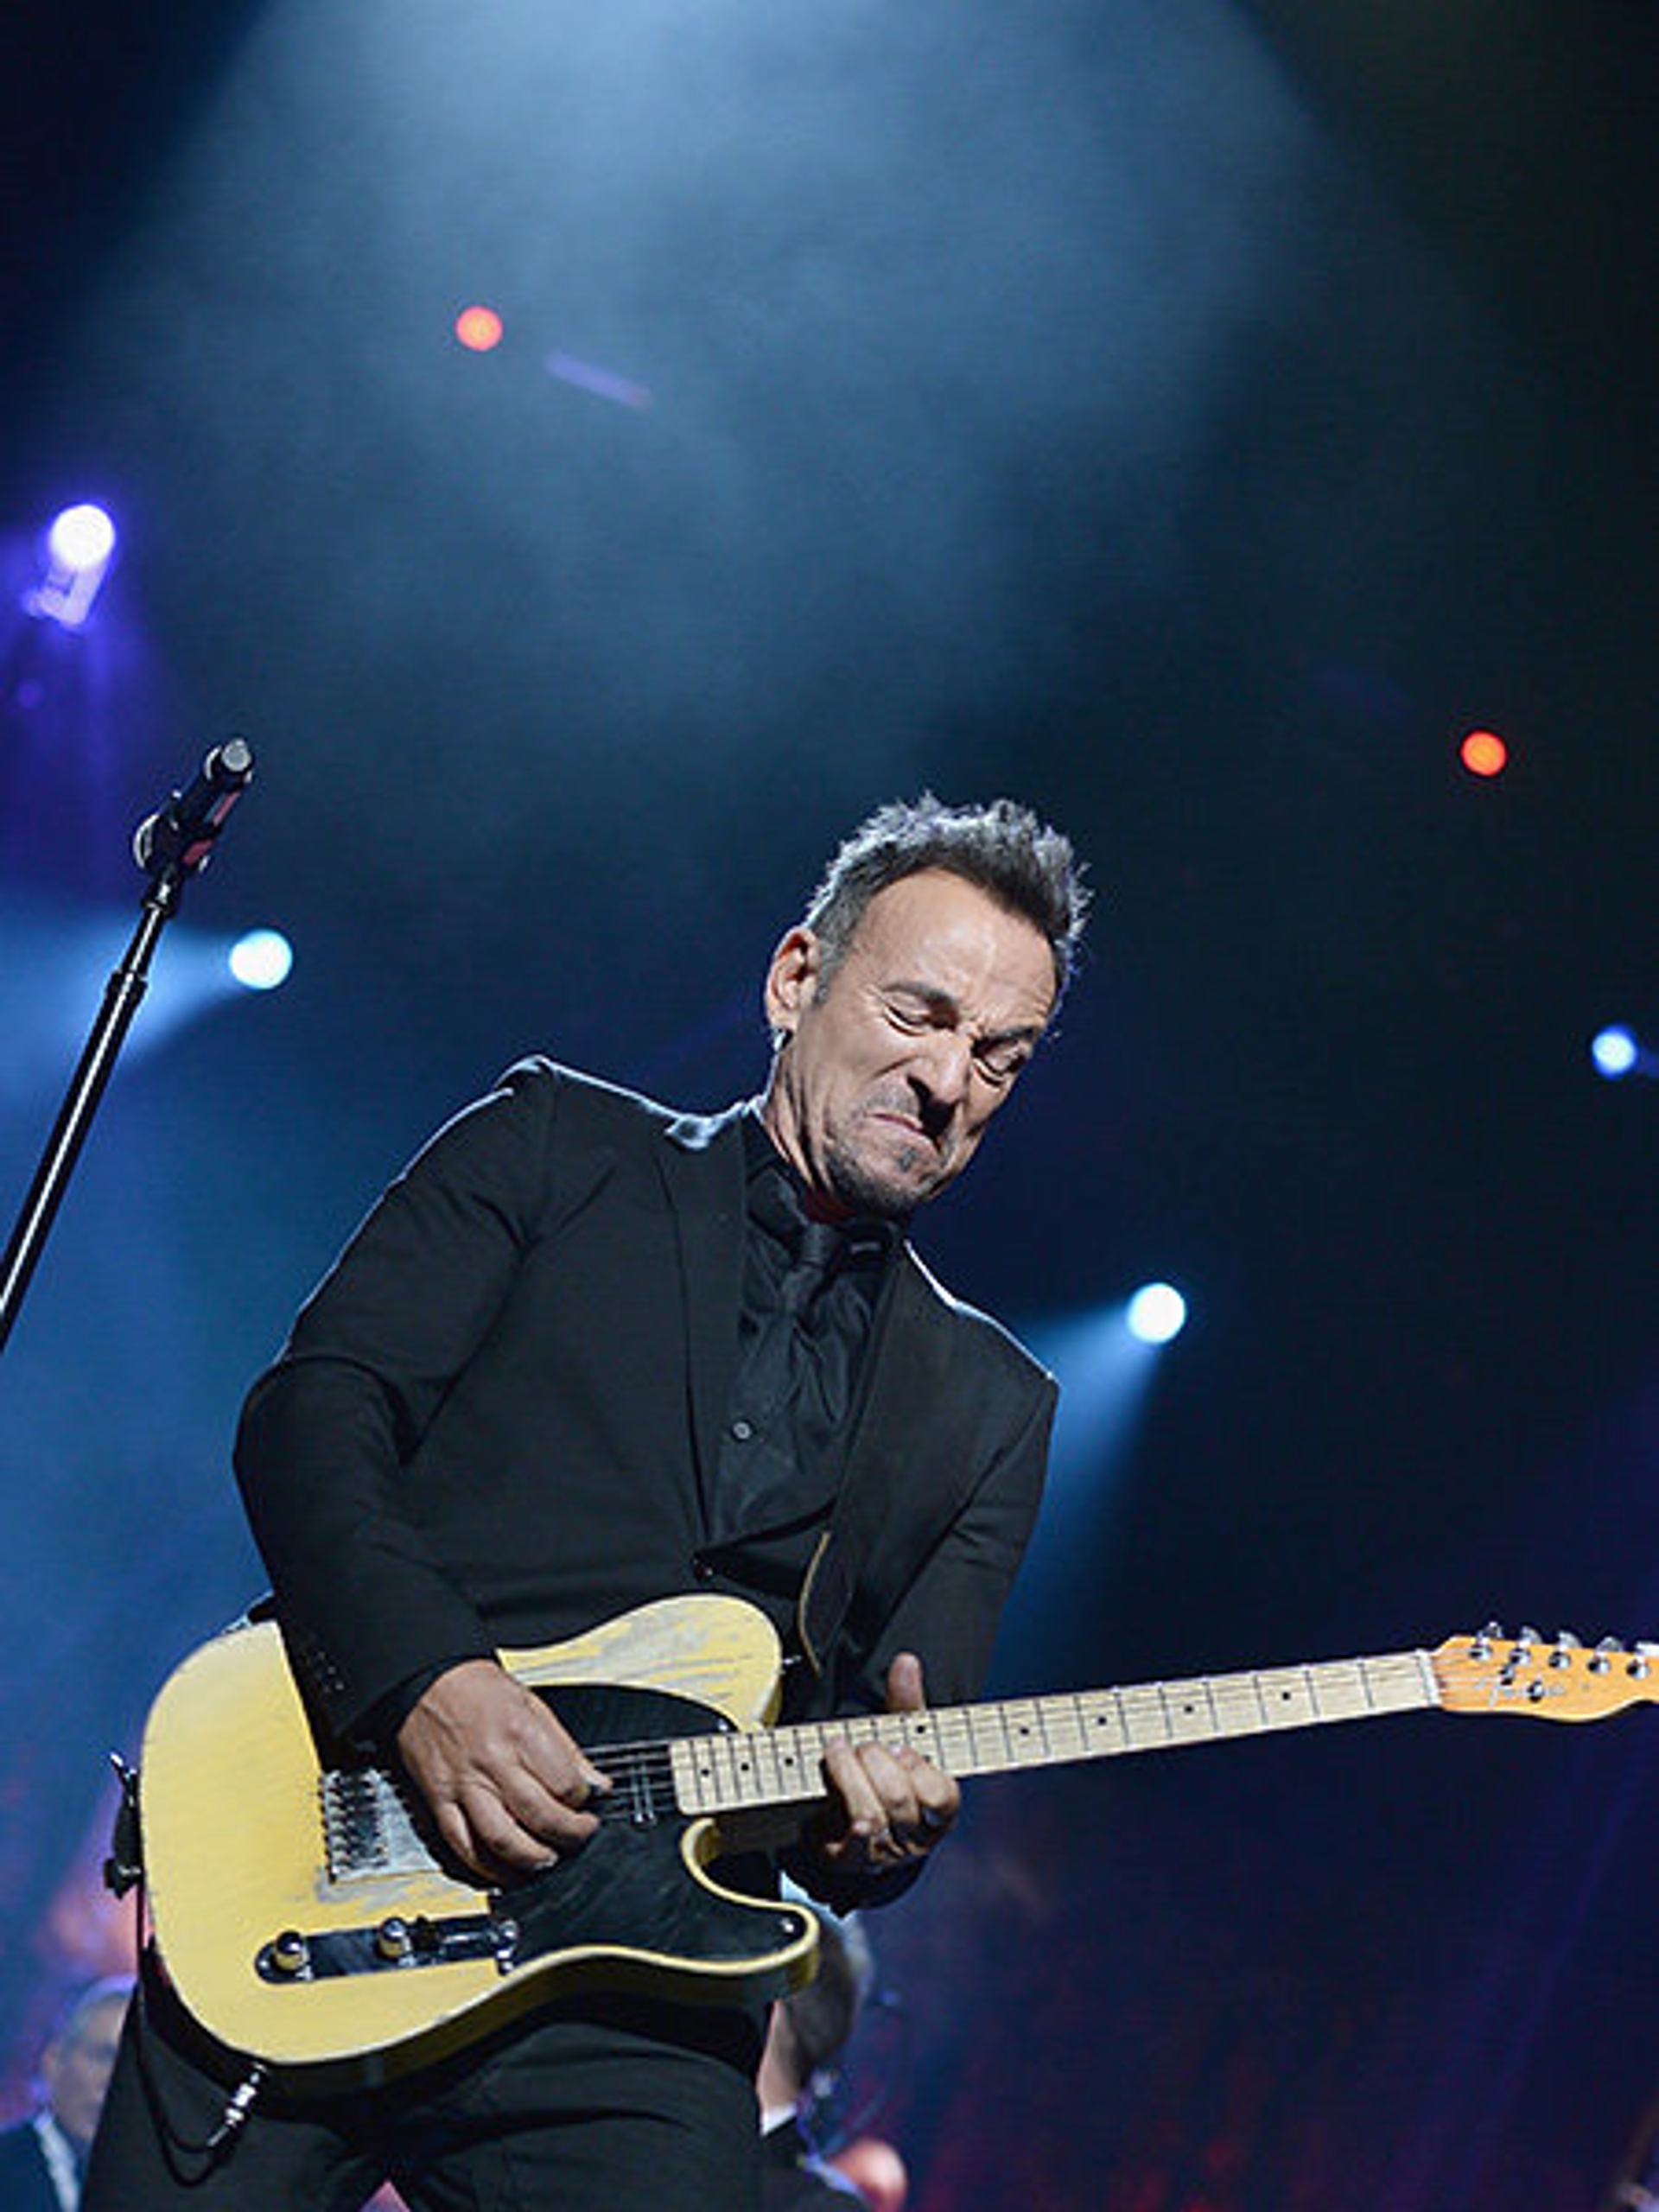 funny-guitar-playing-faces-bruce-springsteen-billboard-450